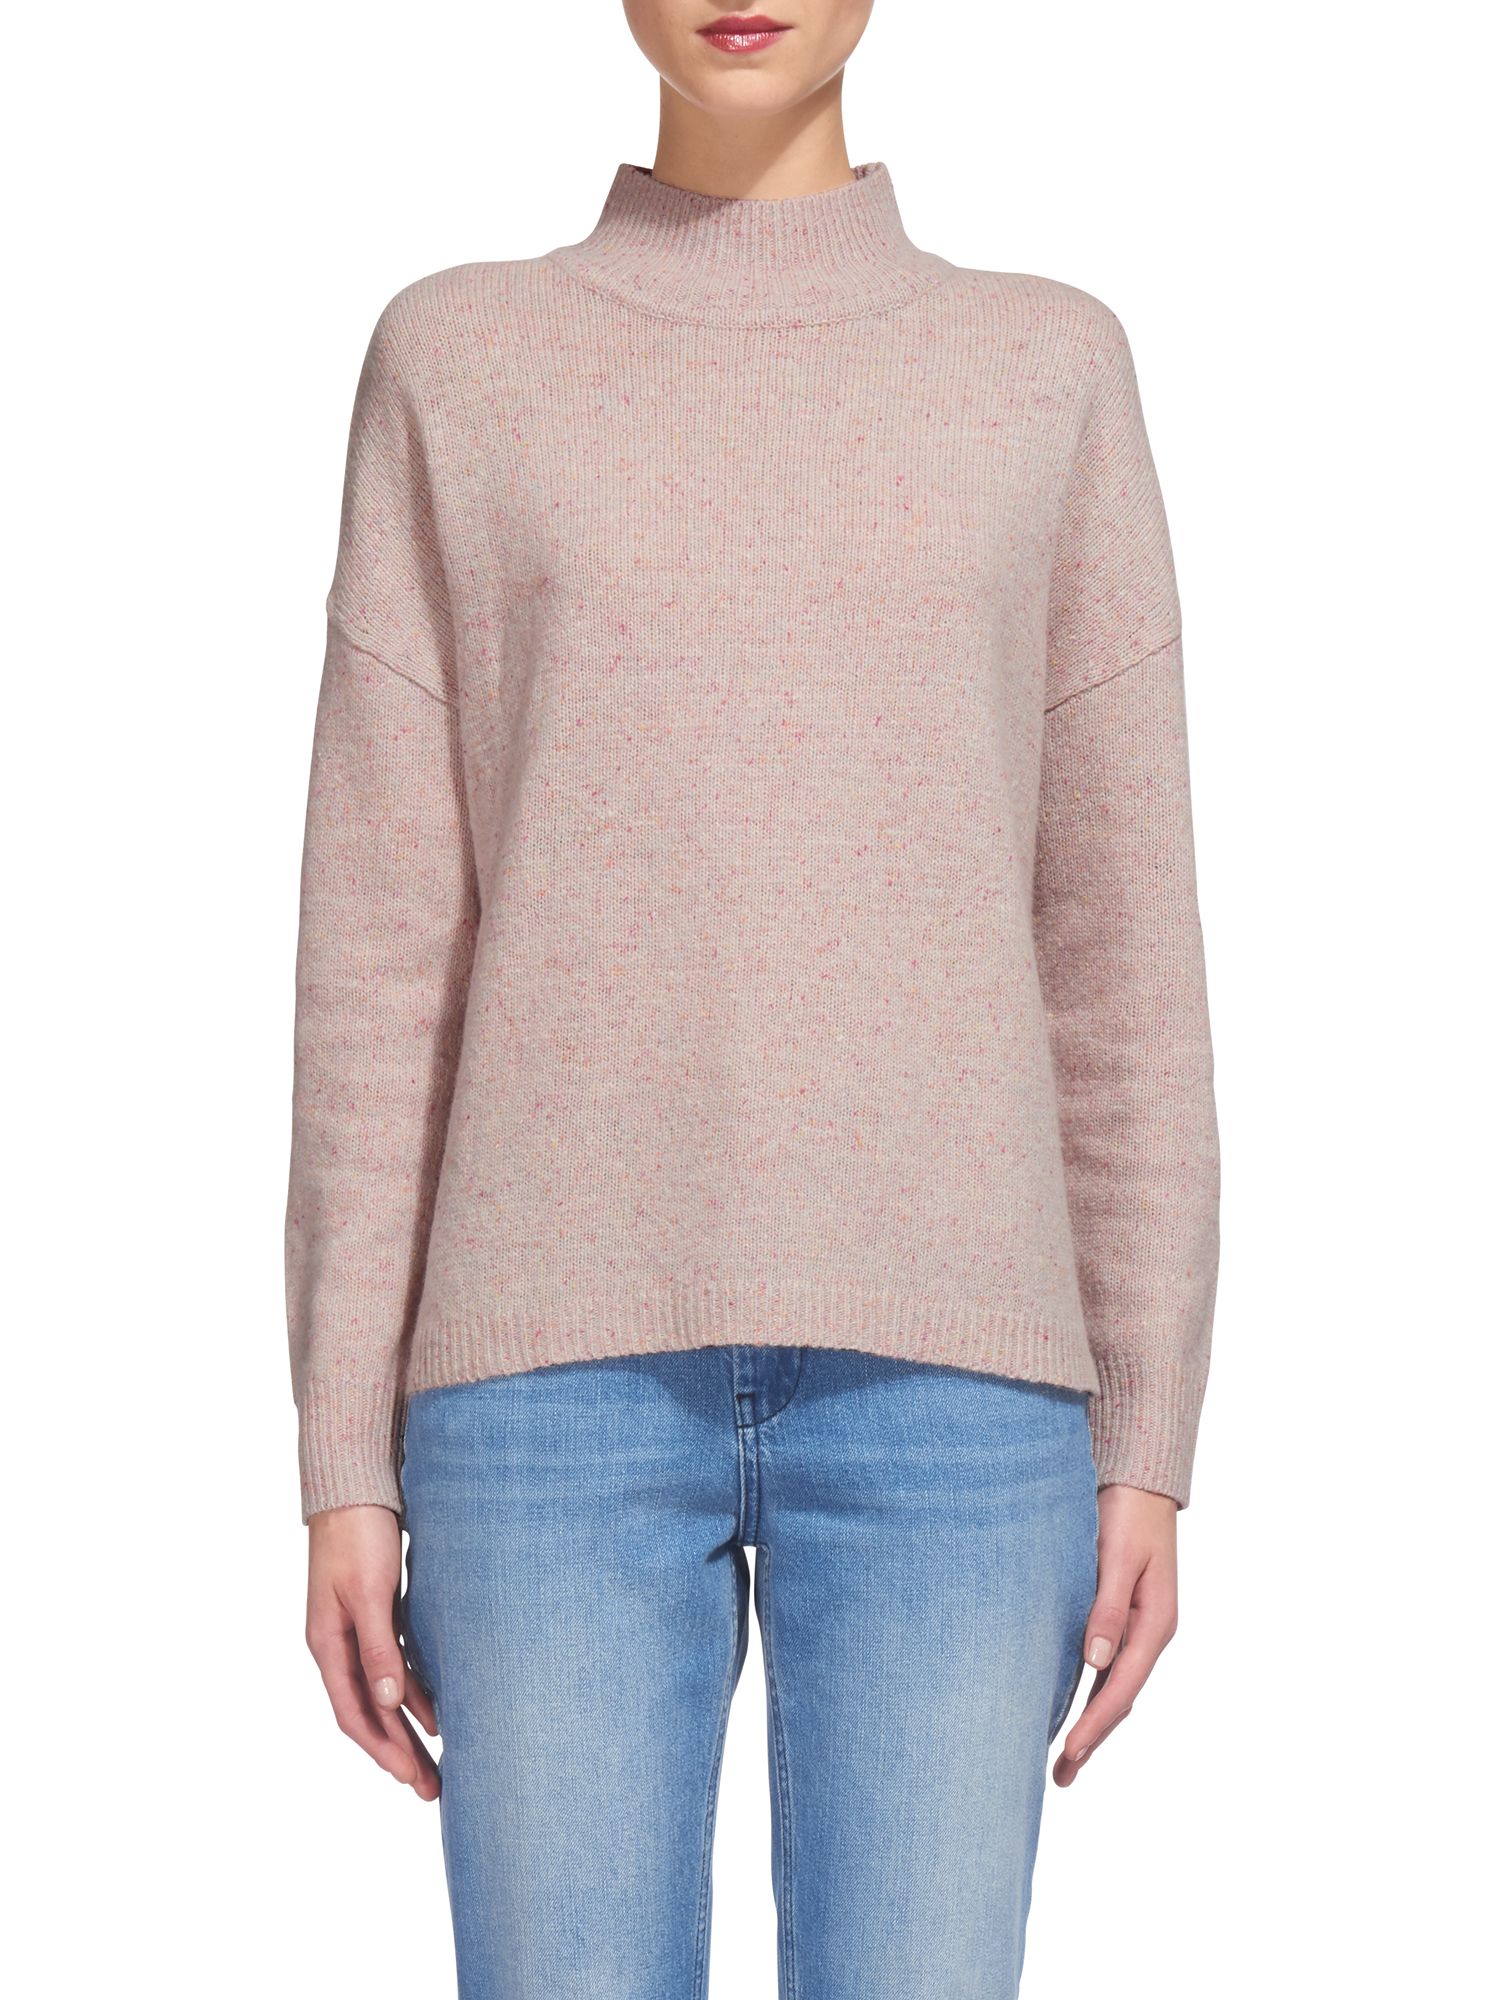 Buy Whistles Funnel Neck Donegal Knit, Pale Pink | John Lewis